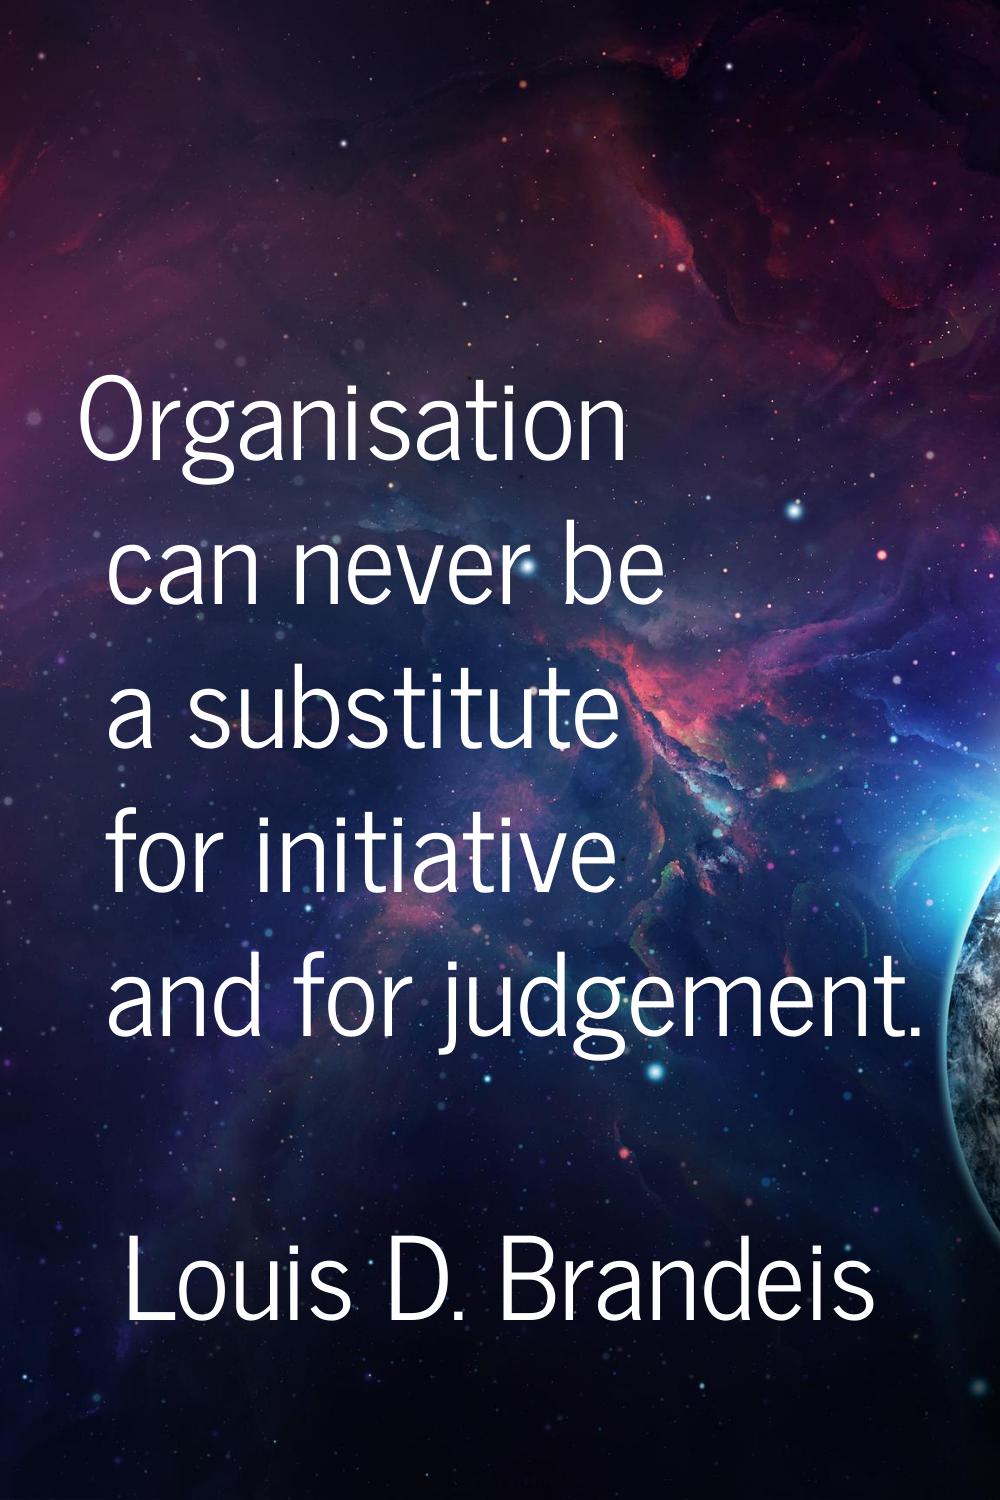 Organisation can never be a substitute for initiative and for judgement.